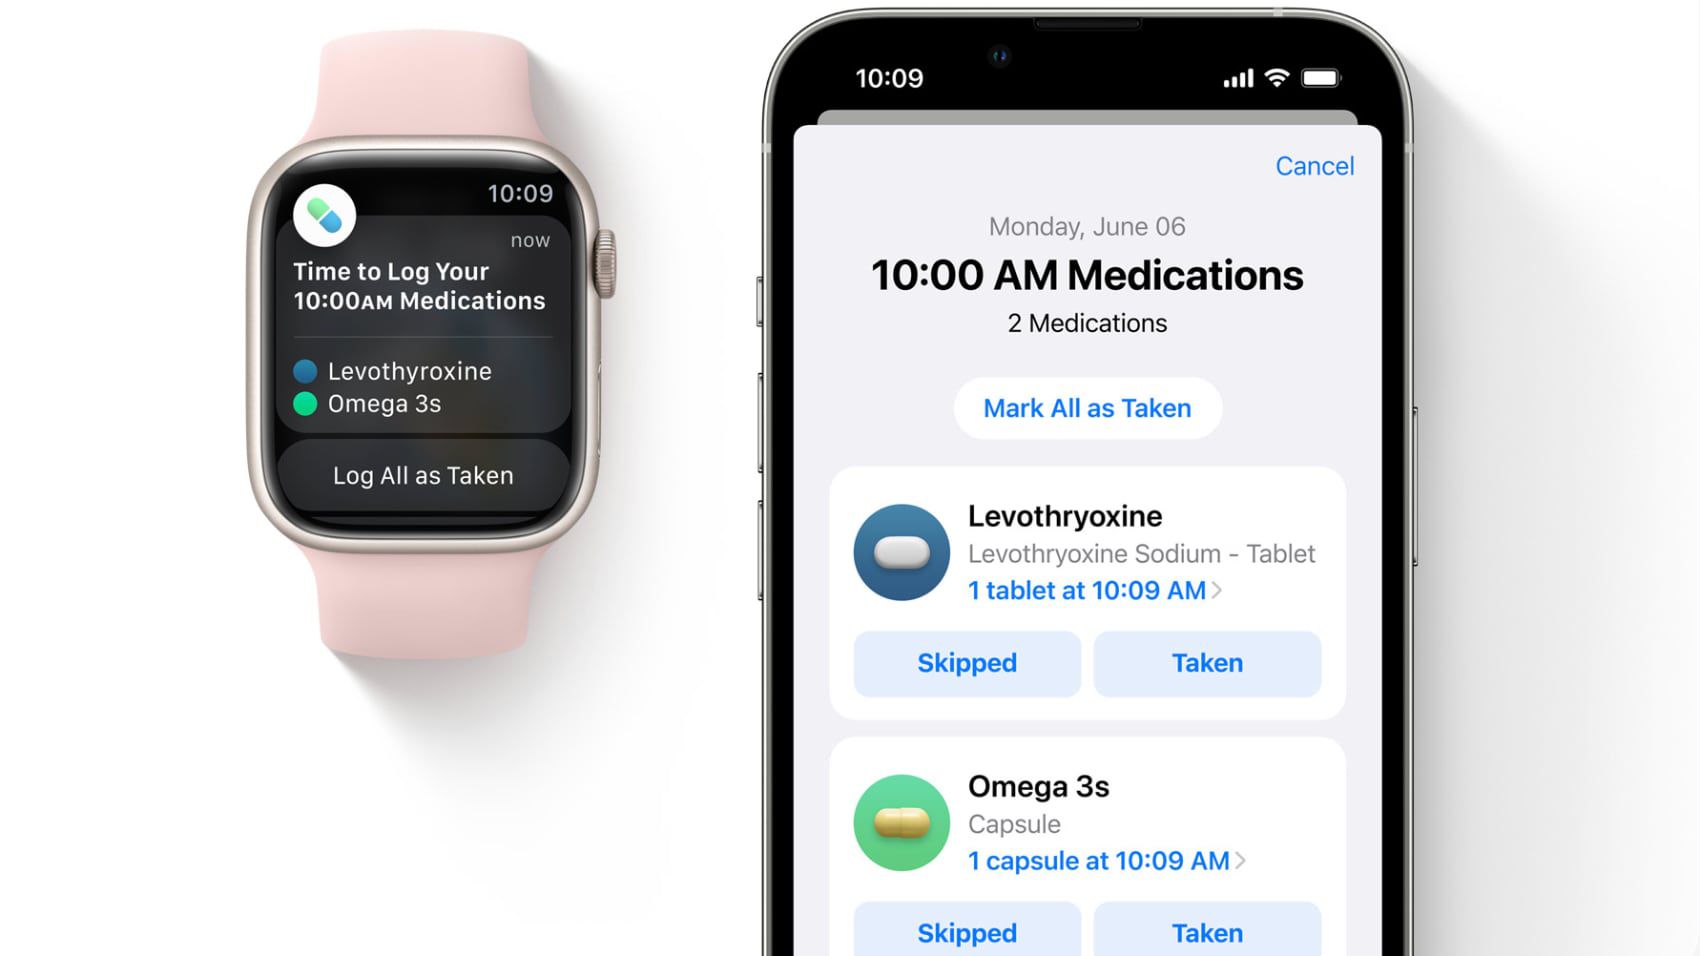 iOS 16 and watchOS 9 Add Support for Tracking Medications - macrumors.com